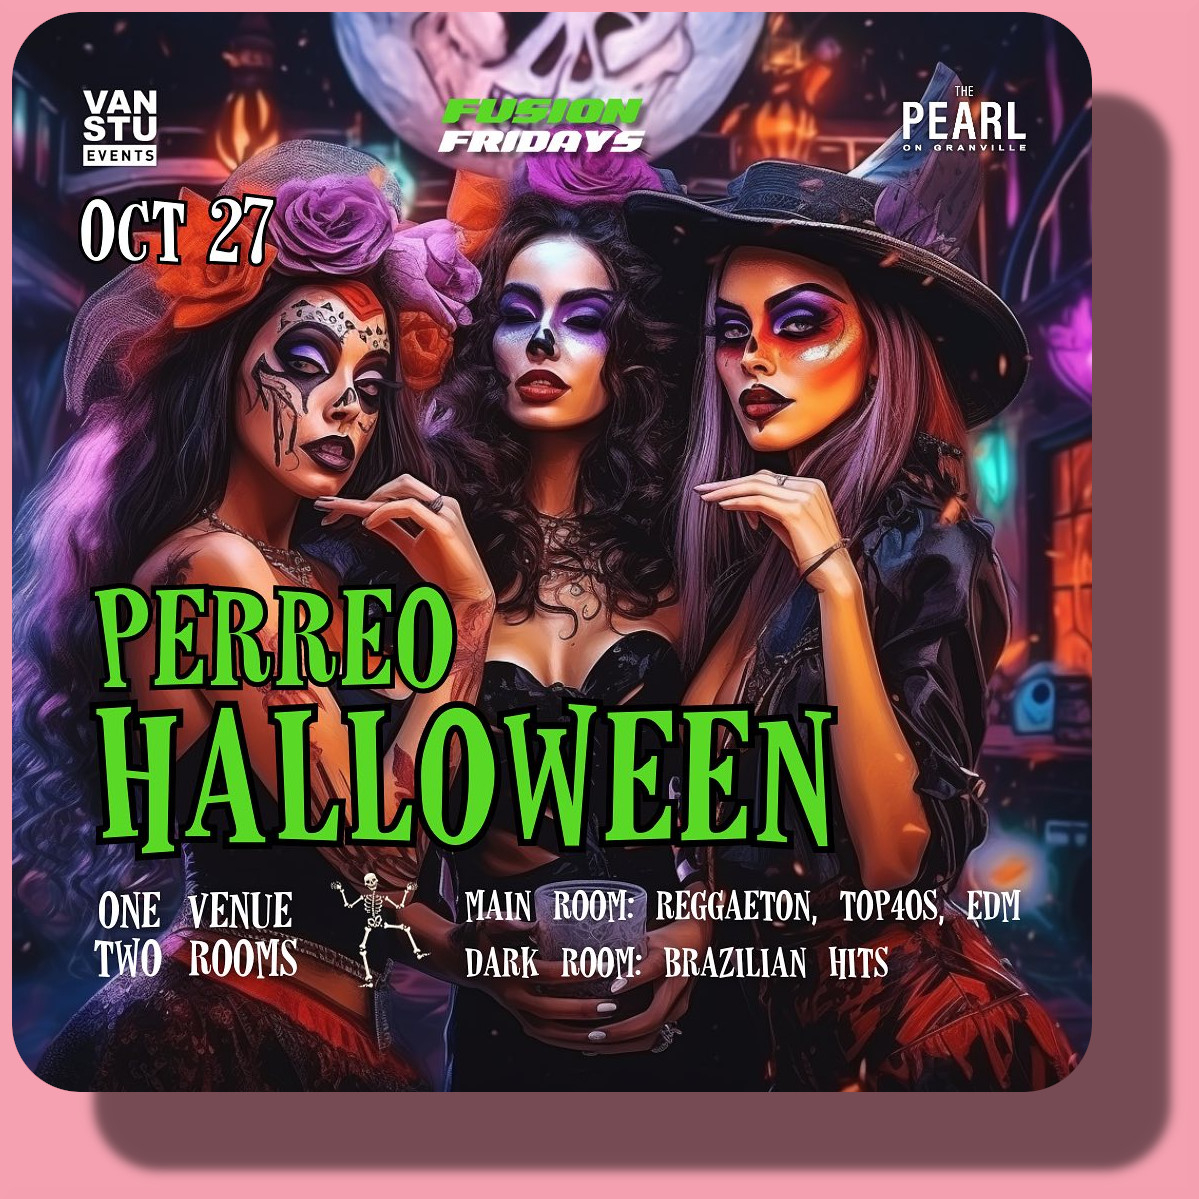 The Perreo Halloween Party at The Pearl, Vancouver